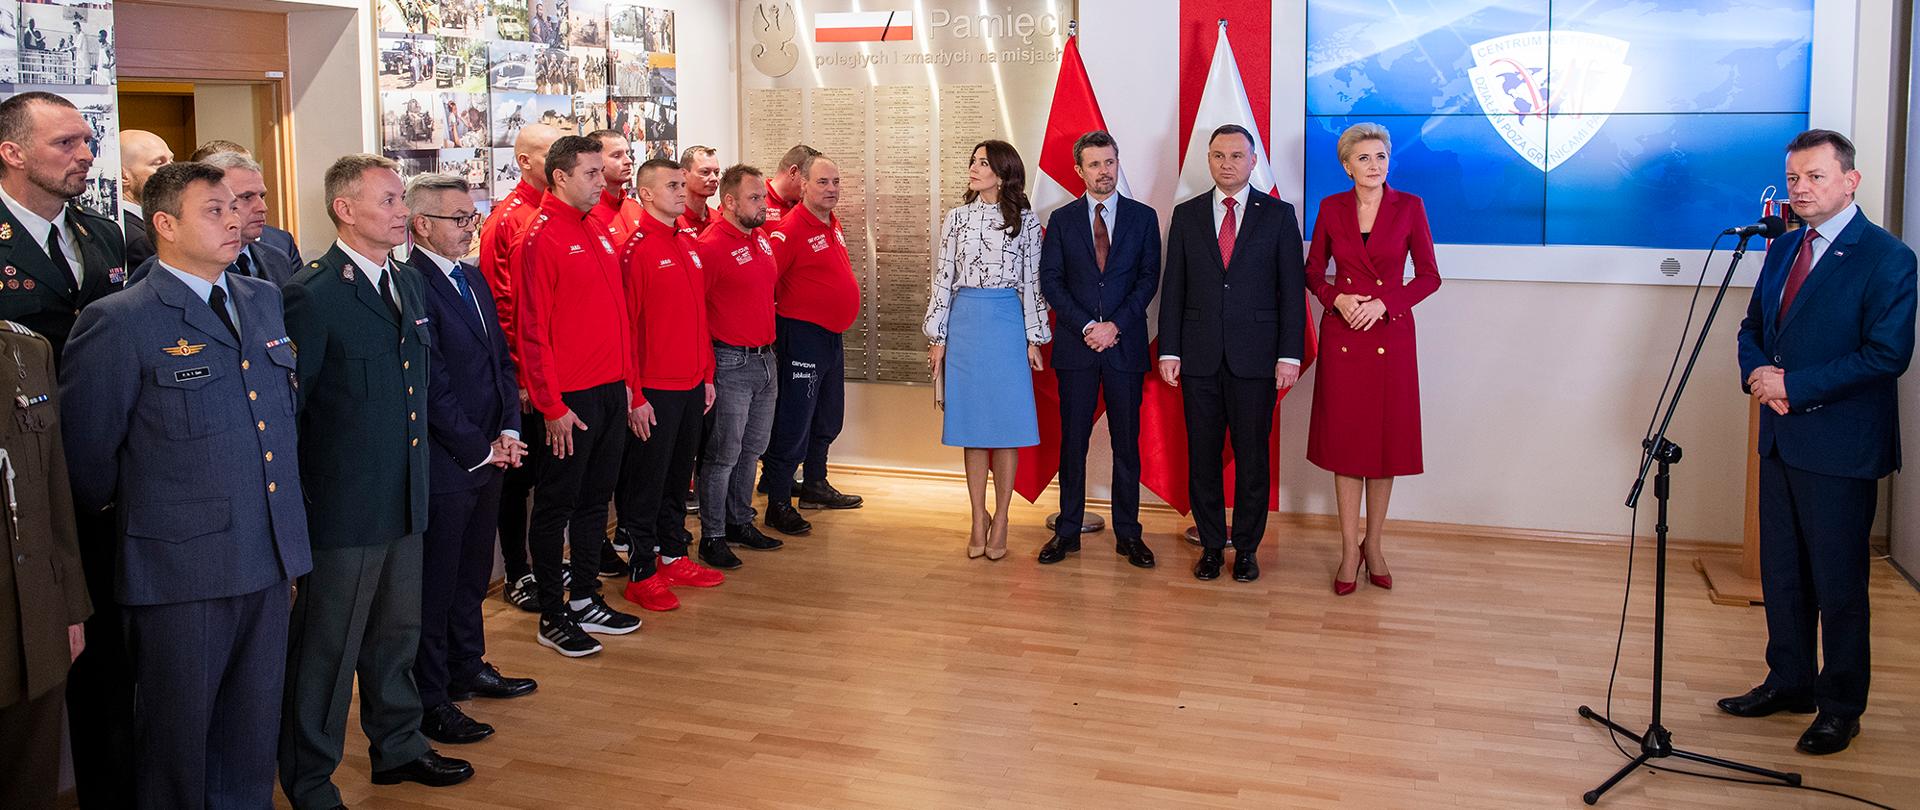 The head of the Ministry of National Defence participated on November 25, 2019 in a meeting of the successor to the throne of the Kingdom of Denmark Prince Frederick and Princess Maria Elizabeth and the Polish presidential couple Andrzej Duda and Agata Kornhauser - Duda with soldiers - veterans from Poland and Denmark.